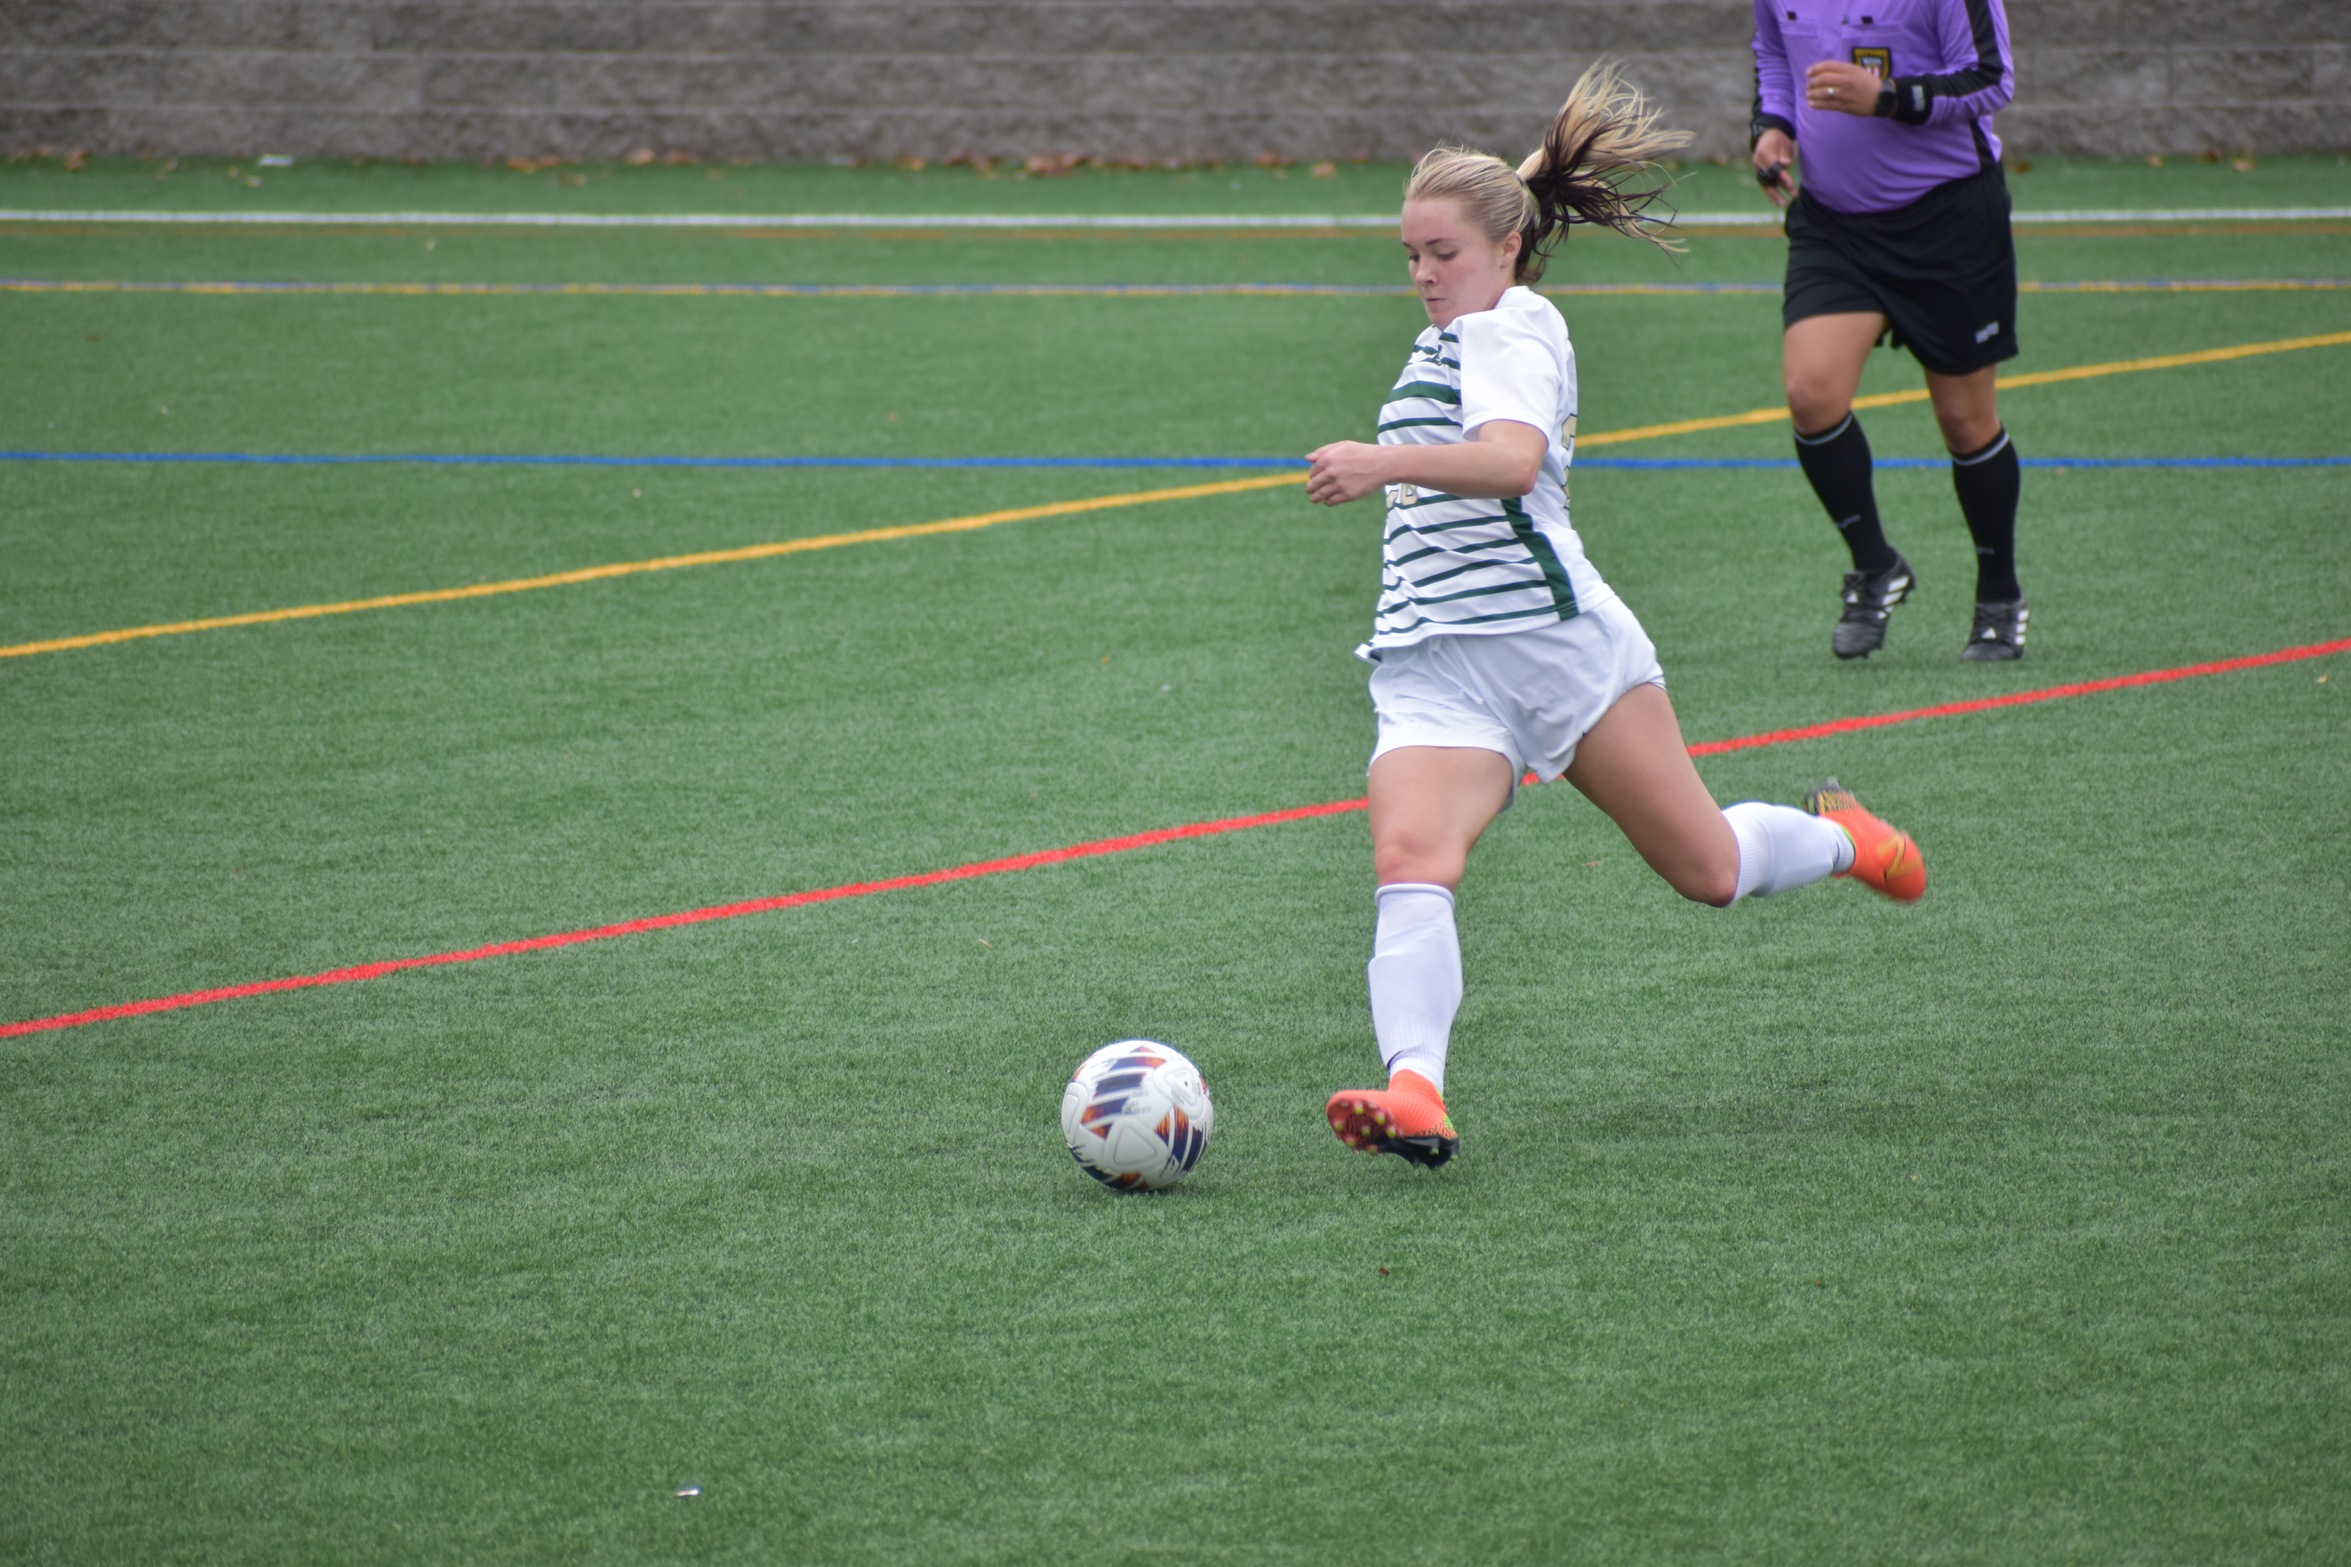 Blazers, Falcons Draw 2-2 in GNAC Action